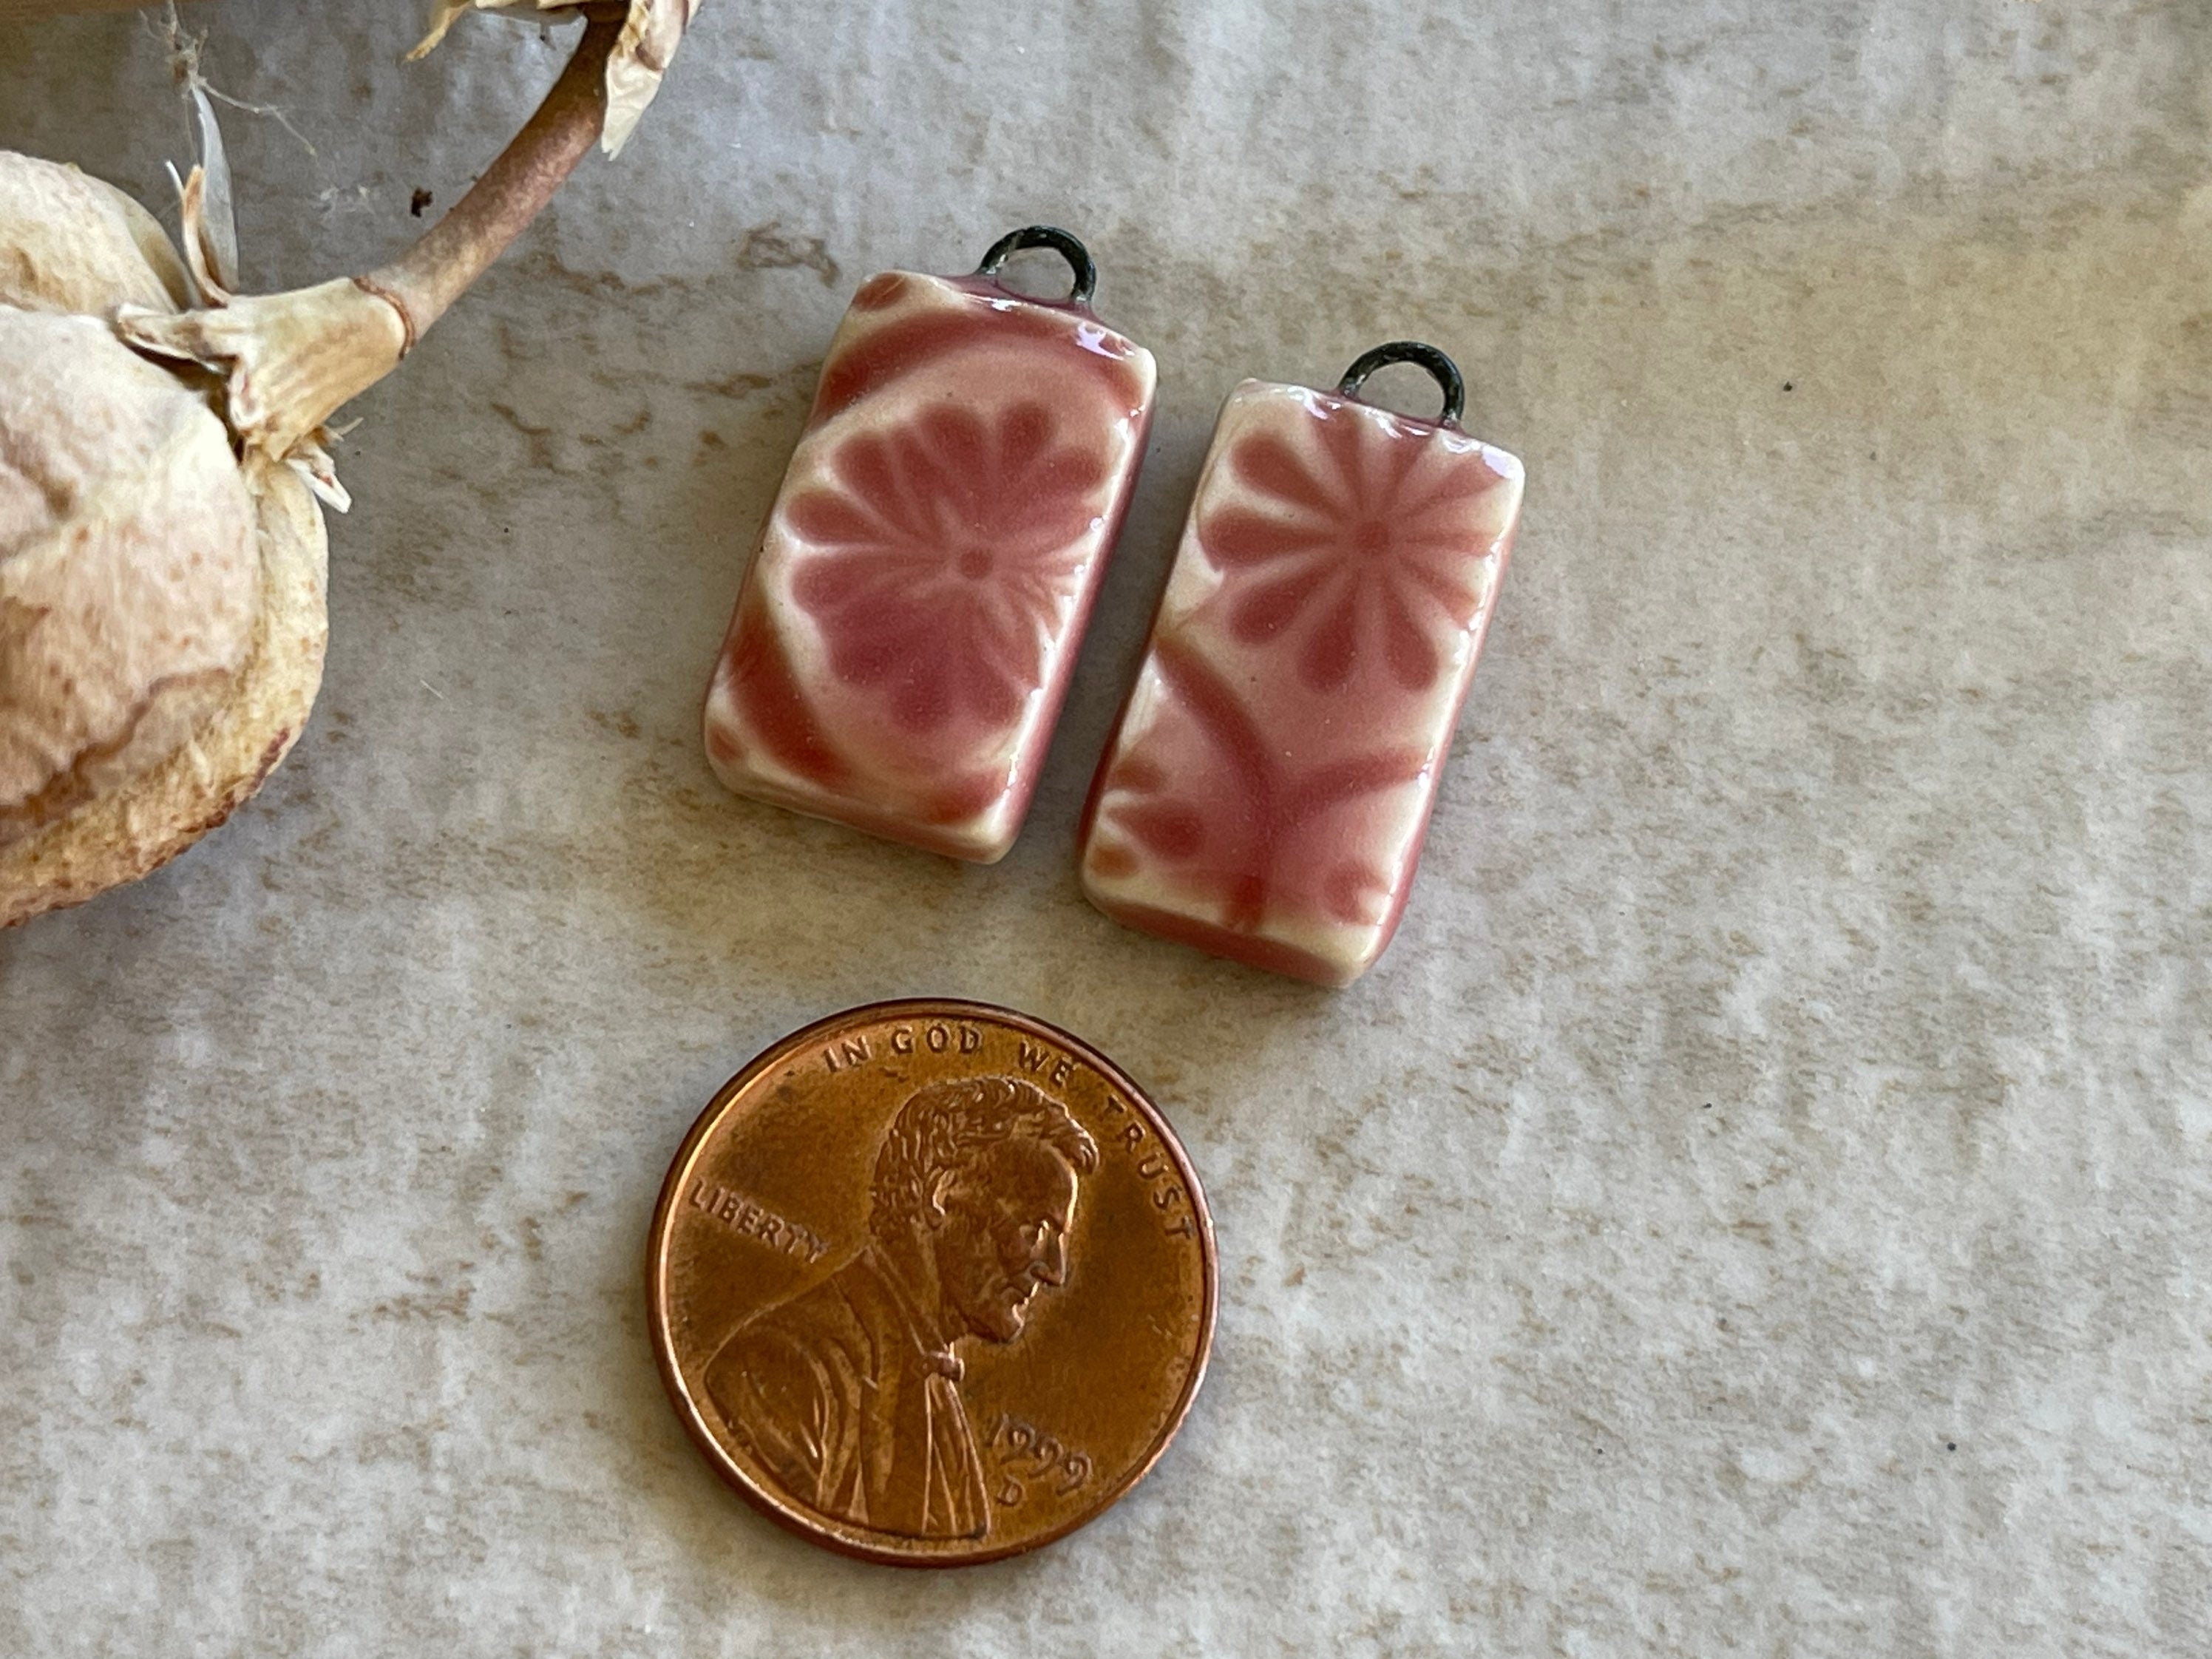 Pink rectangle, Earring Bead Pair, Porcelain Charms, Ceramic Charms, Jewelry Making Components, Beading Handmade, DIY Earrings, DIY Beads